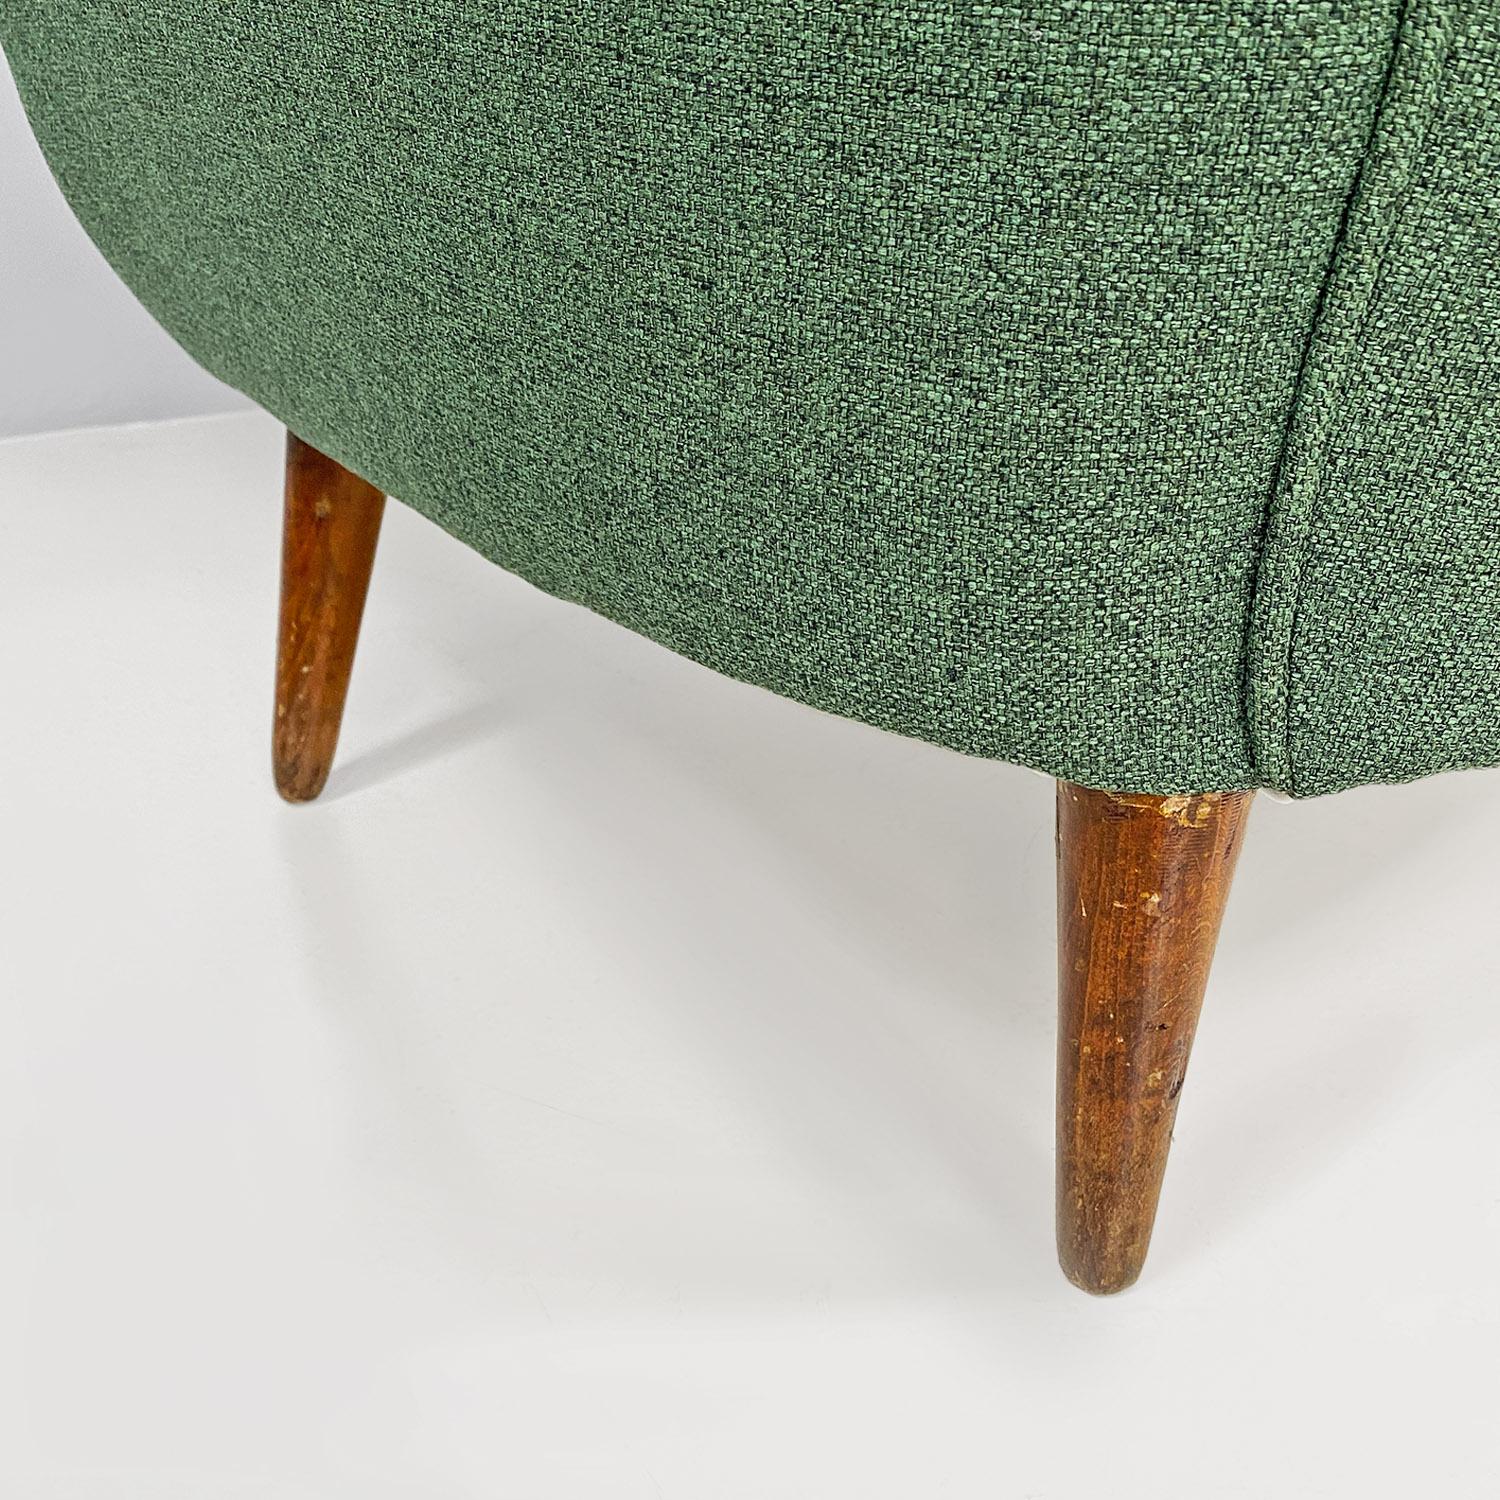 Italian mid century modern two-seater green fabric and wooden sofa, 1950s For Sale 8